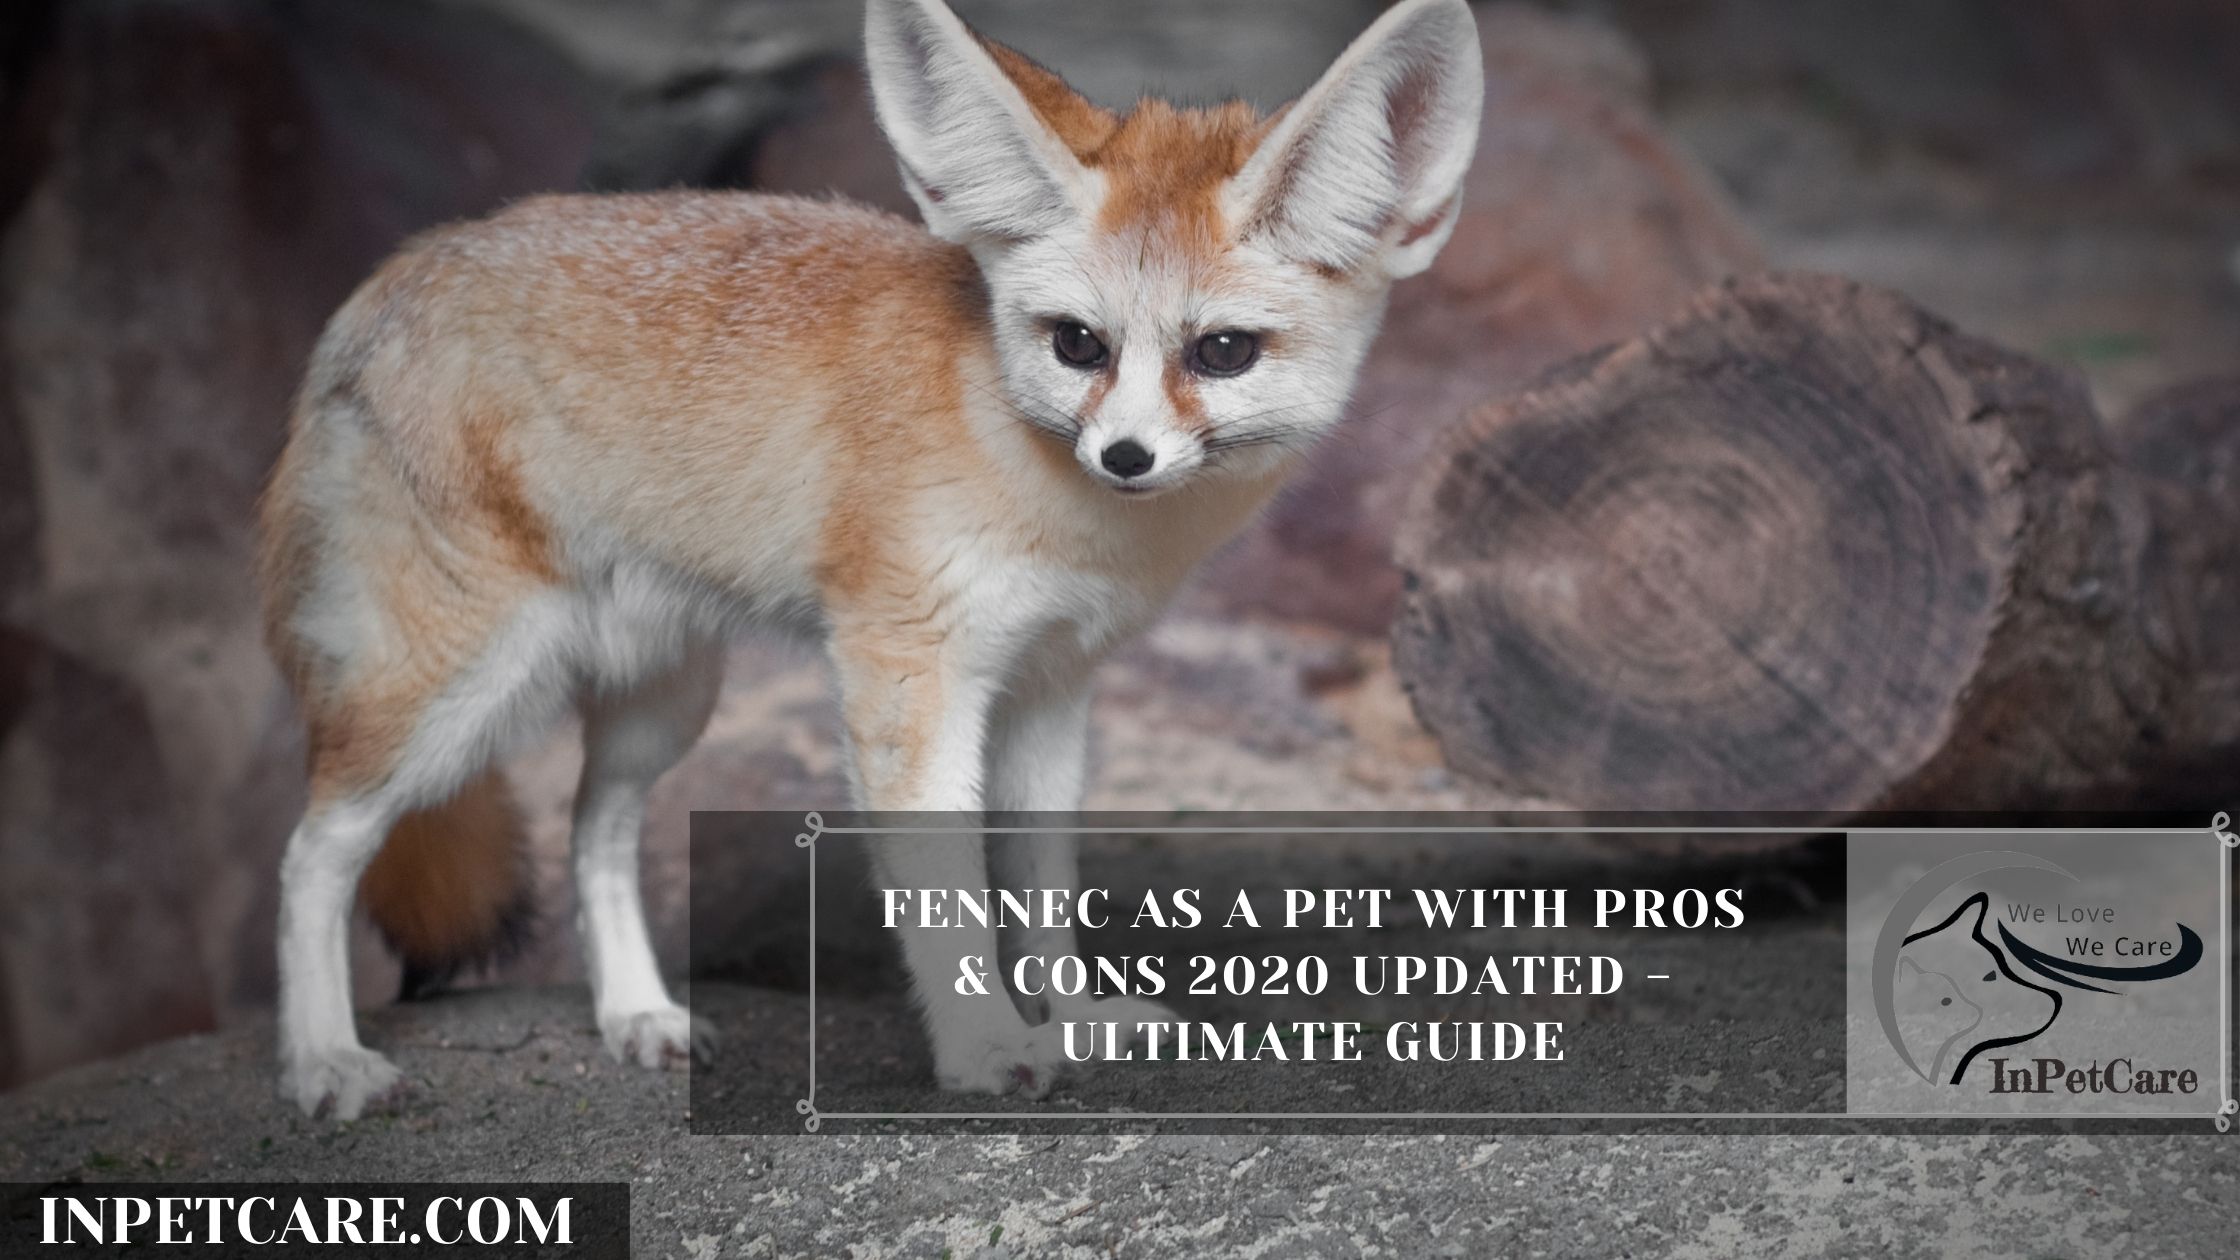 Fennec Foxes As Pets: Cost, Legalities, Risks & Ease of Care